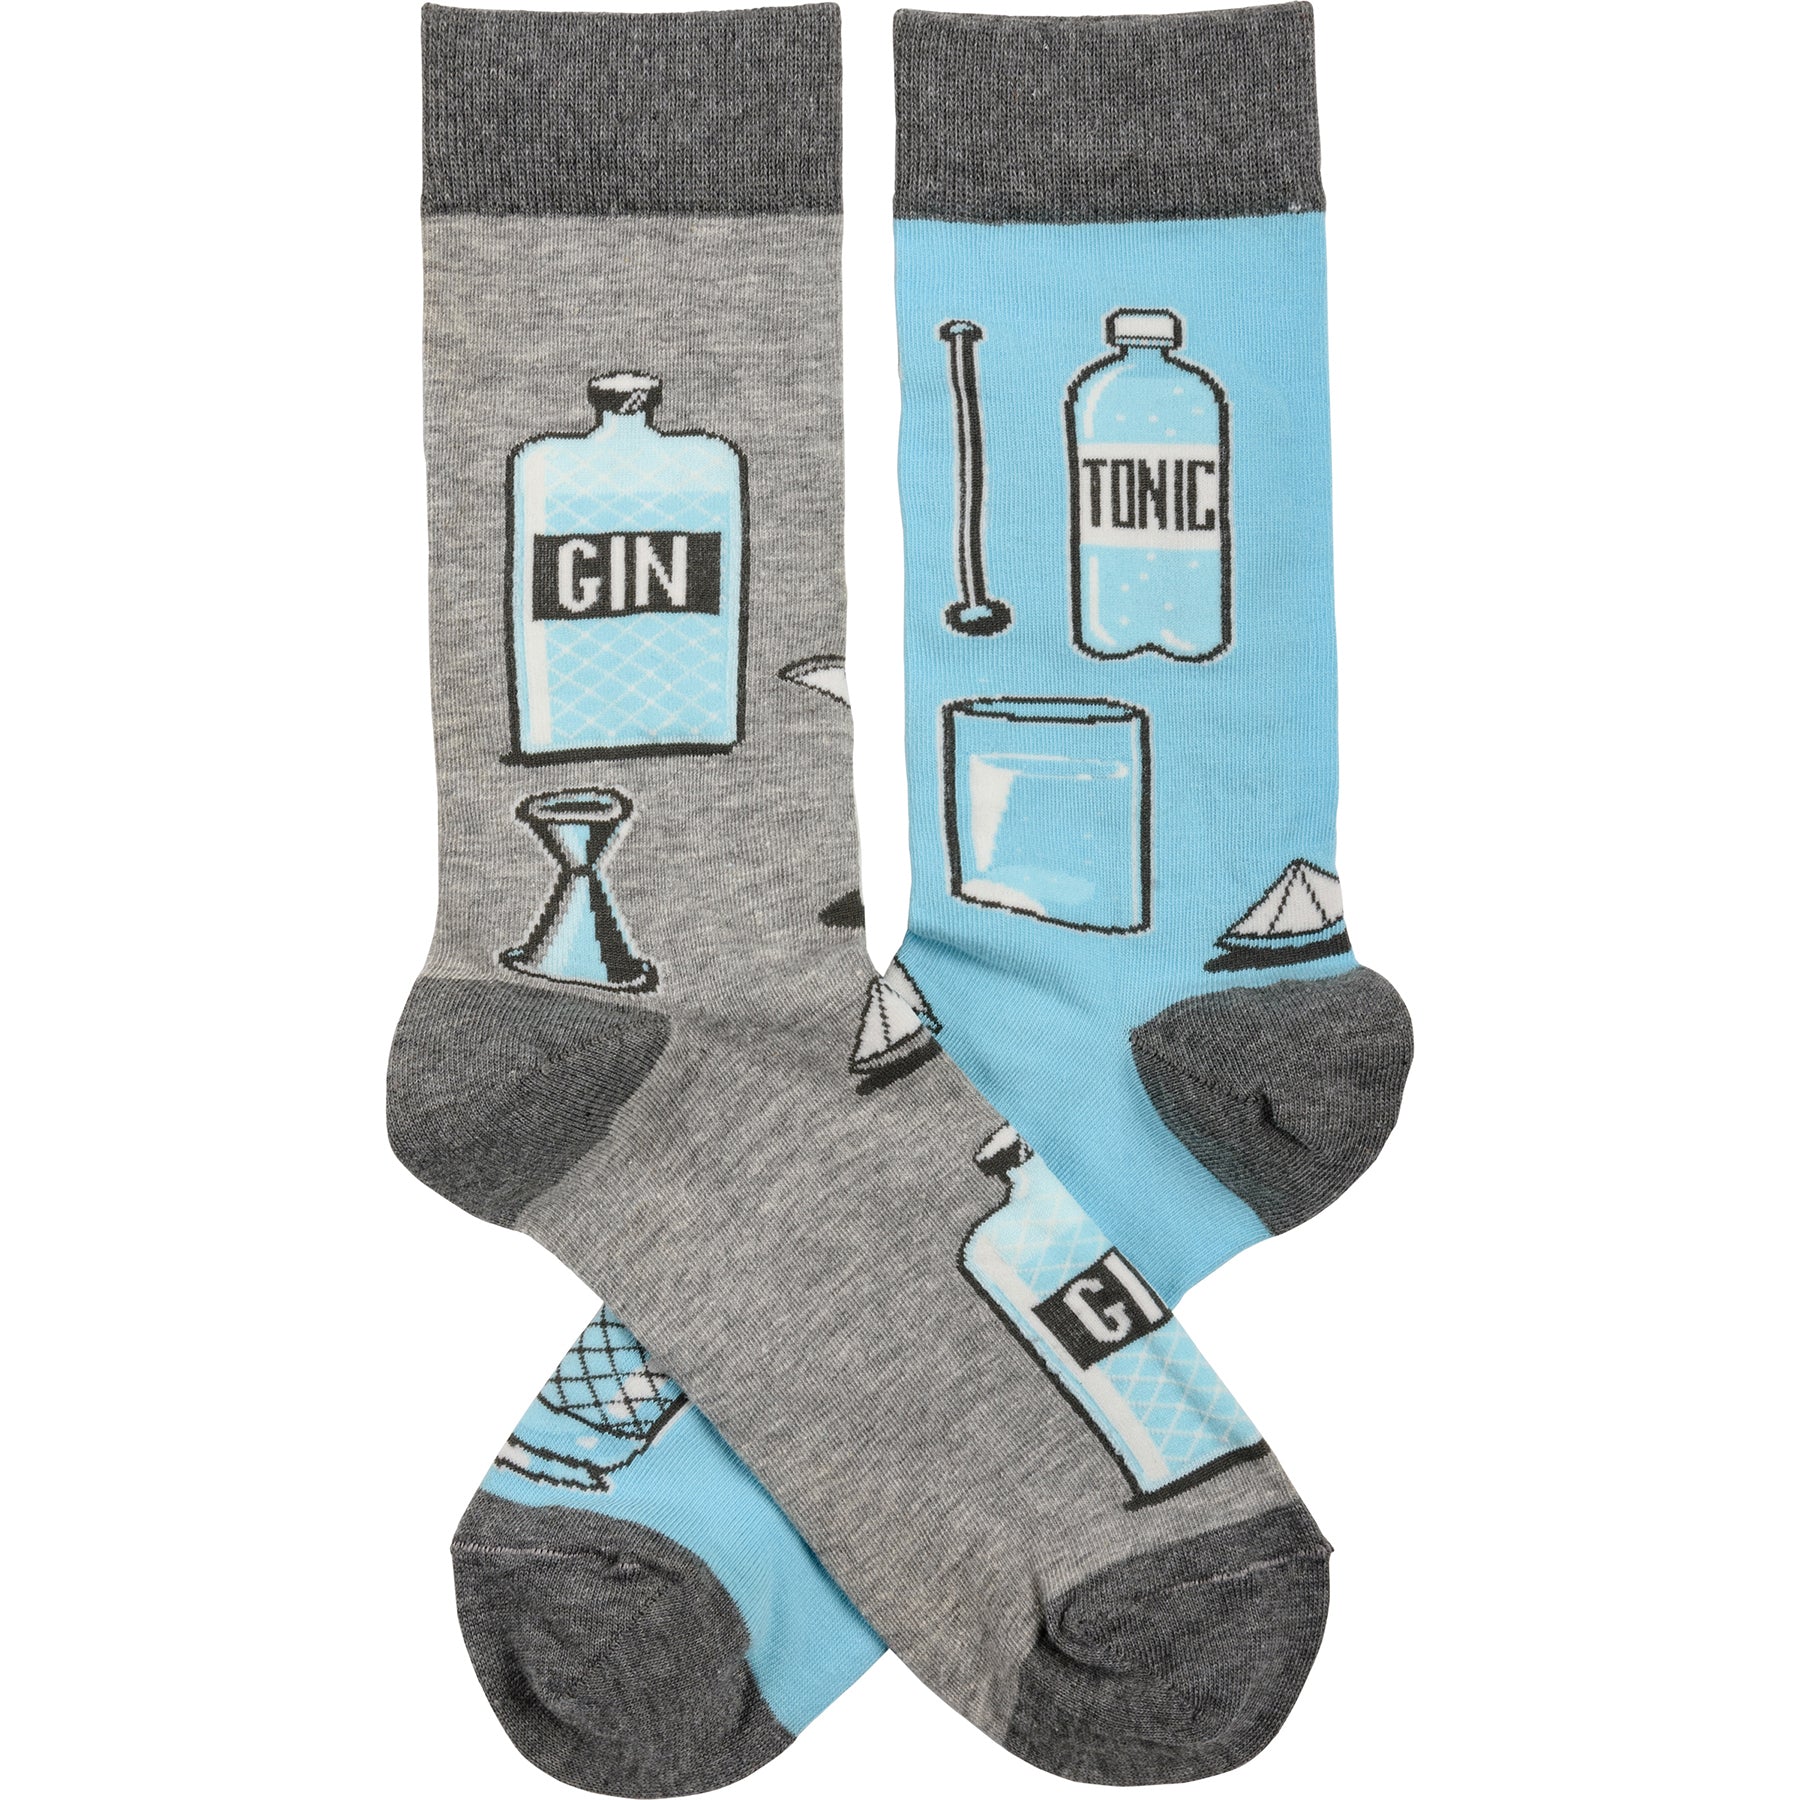 Gin & Tonic Mismatched Funny Novelty Socks in Gray and Blue – The Bullish  Store